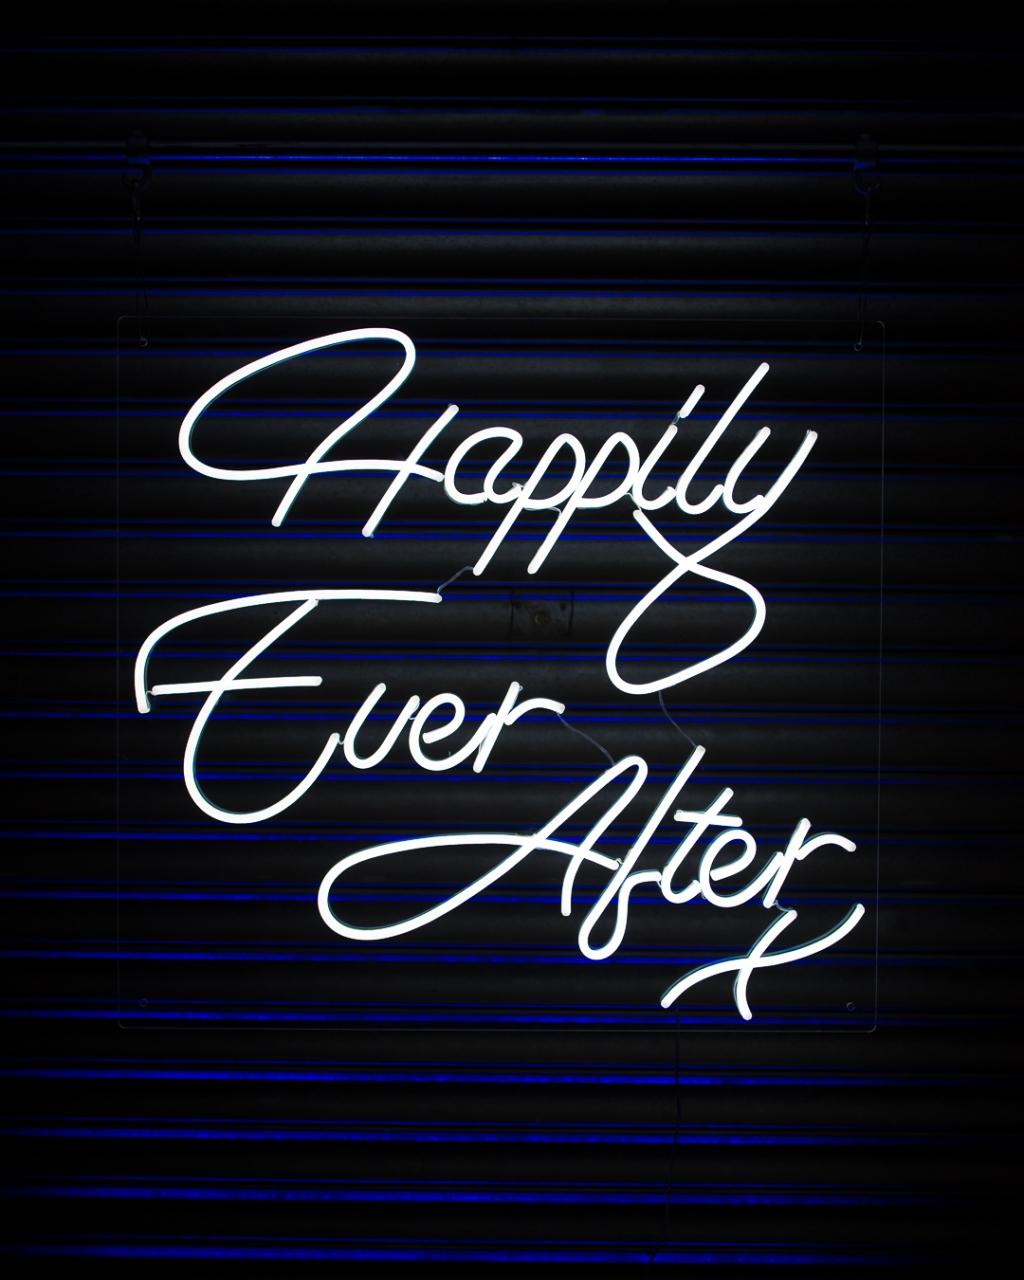 Happily Ever After Neon Sign Hire Pro Event Hire Event Lighting